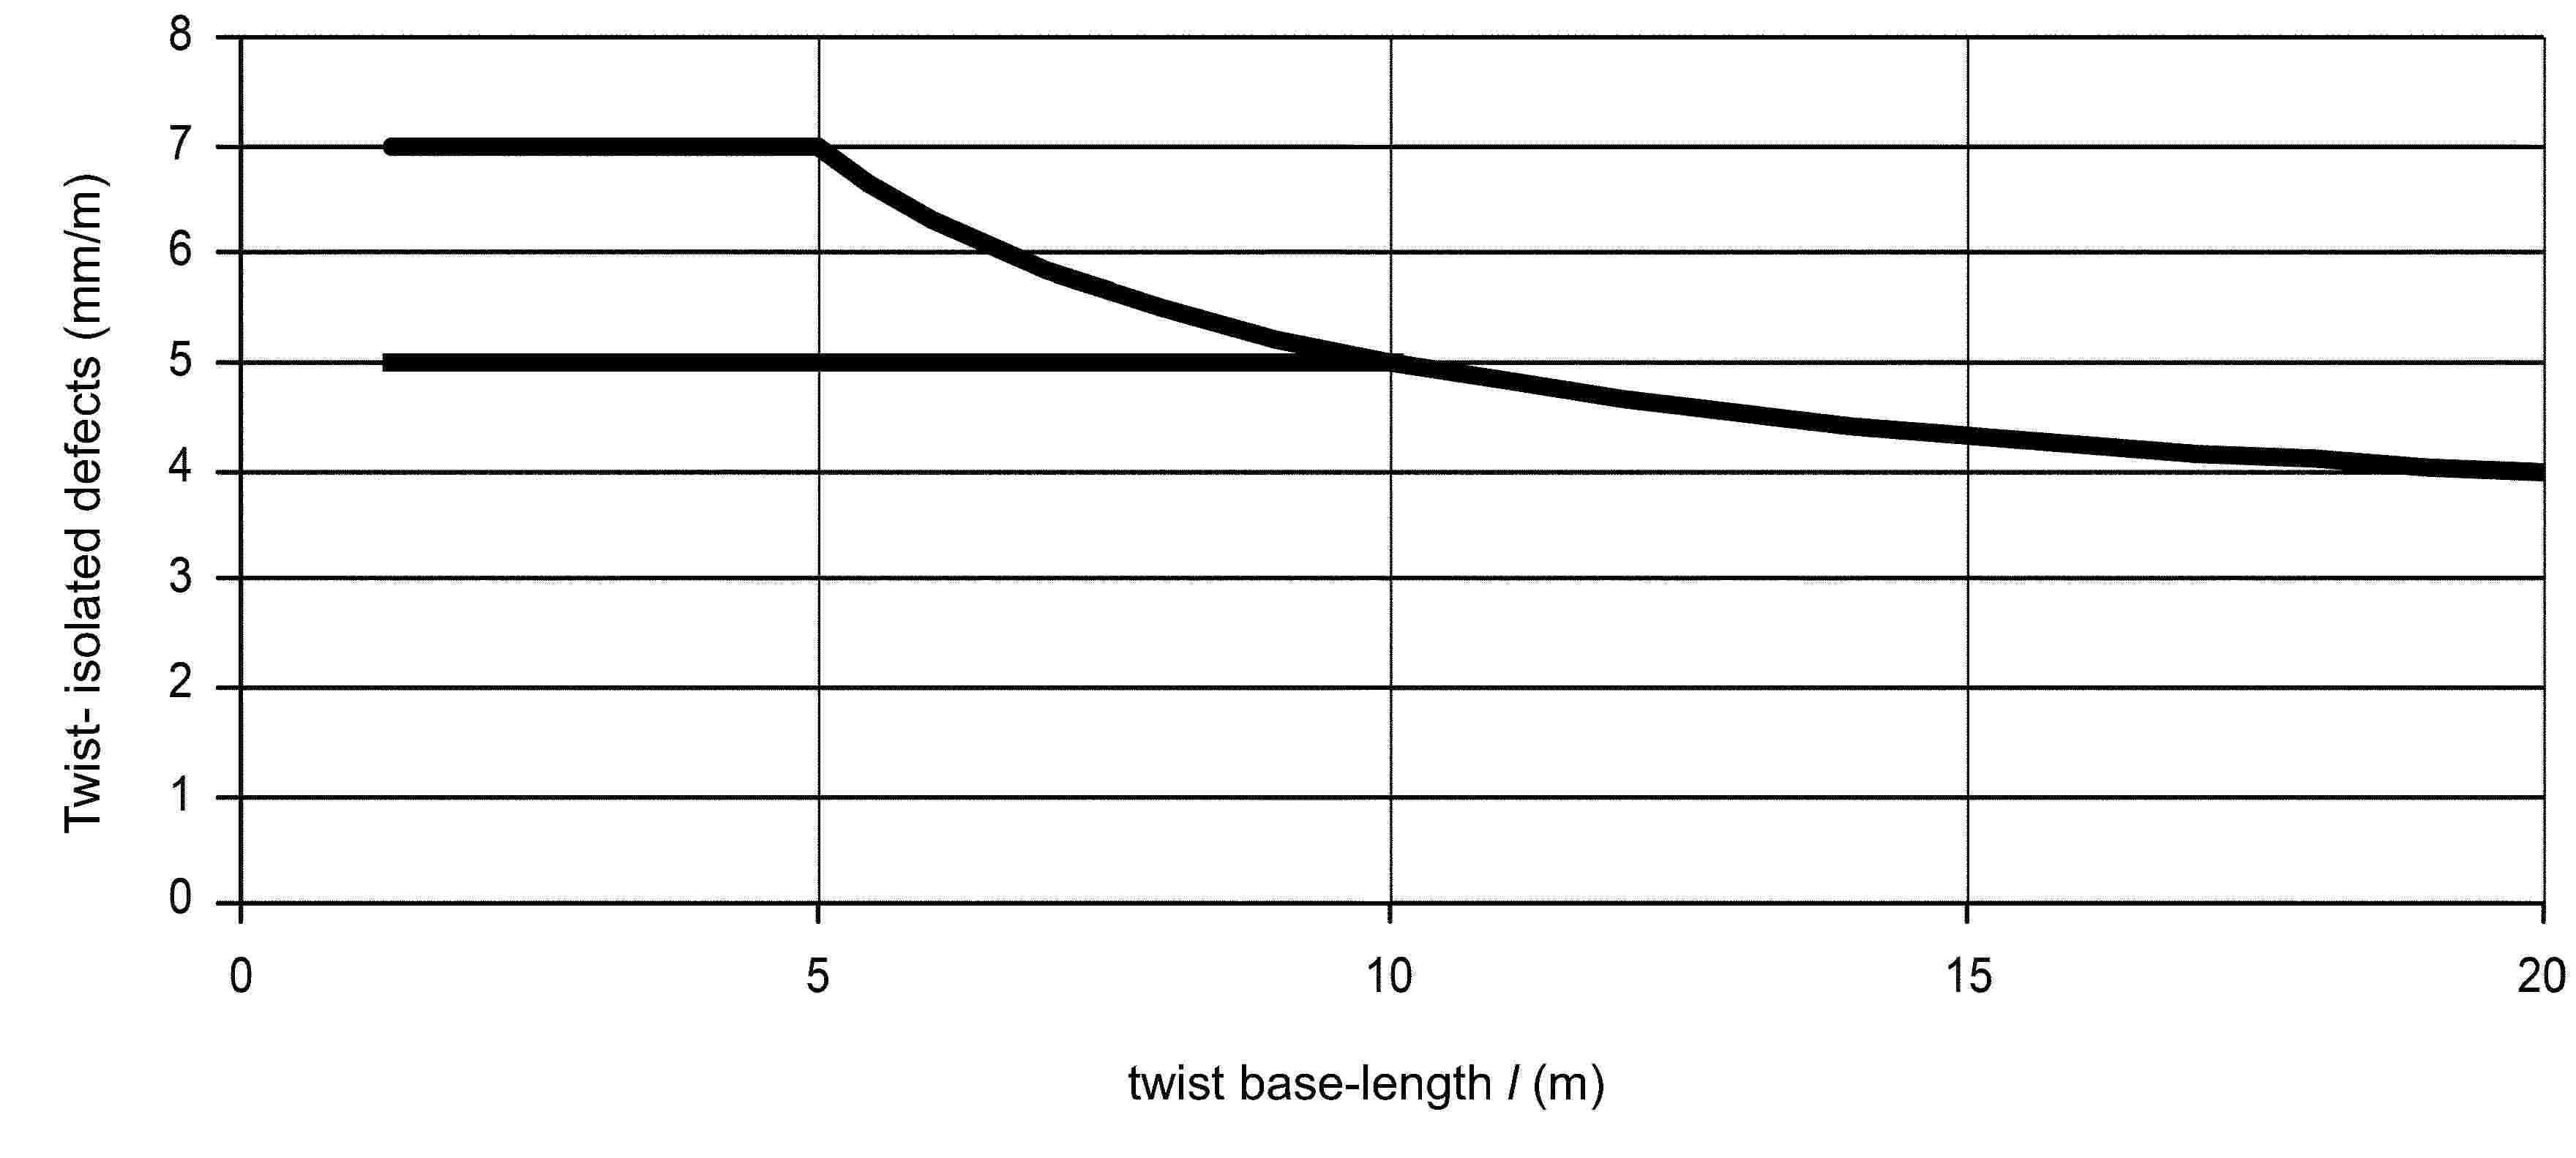 Twist- isolated defects (mm/m)twist base-length / (m)